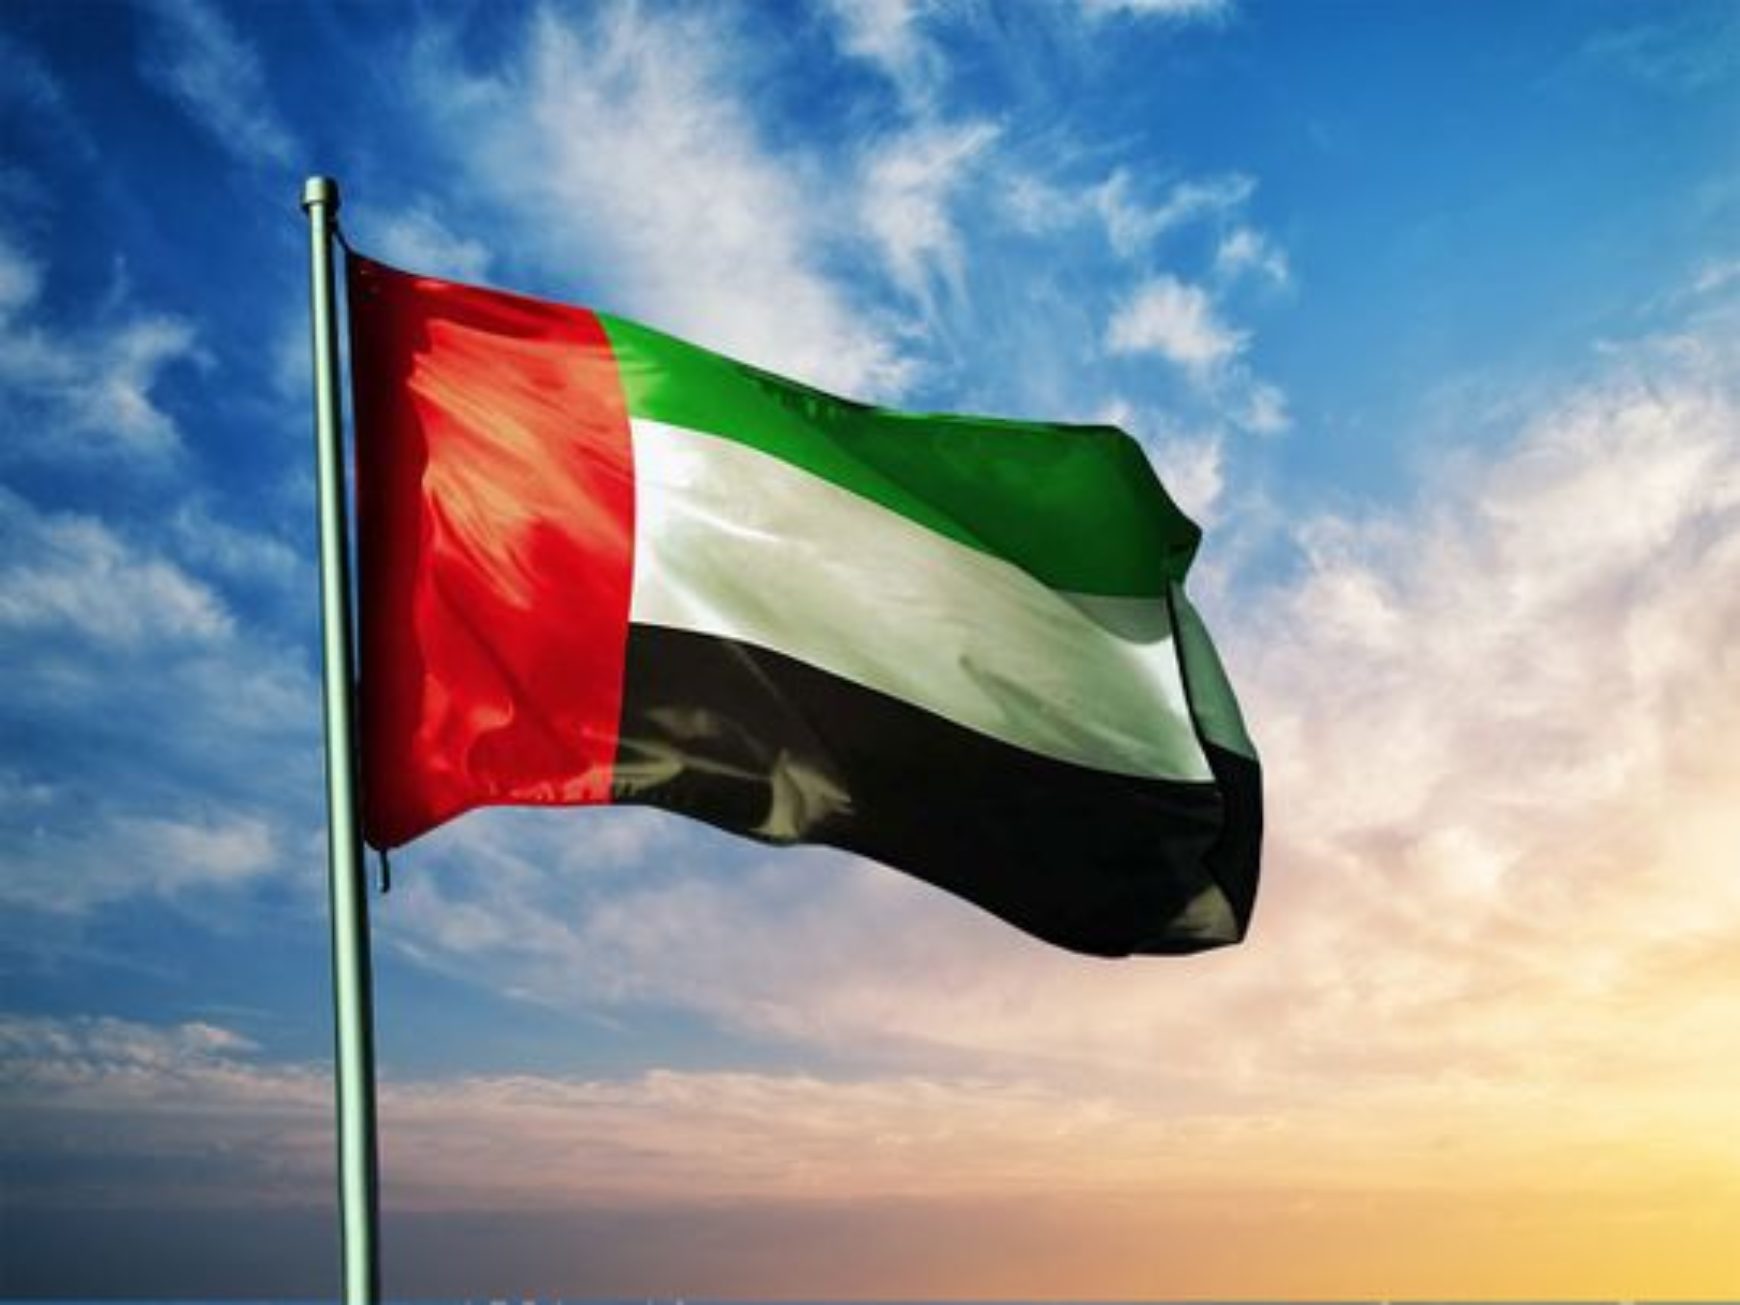 We are saddened to learn of the passing of His Highness Sheikh Khalifa bin Zayed al Nahyan